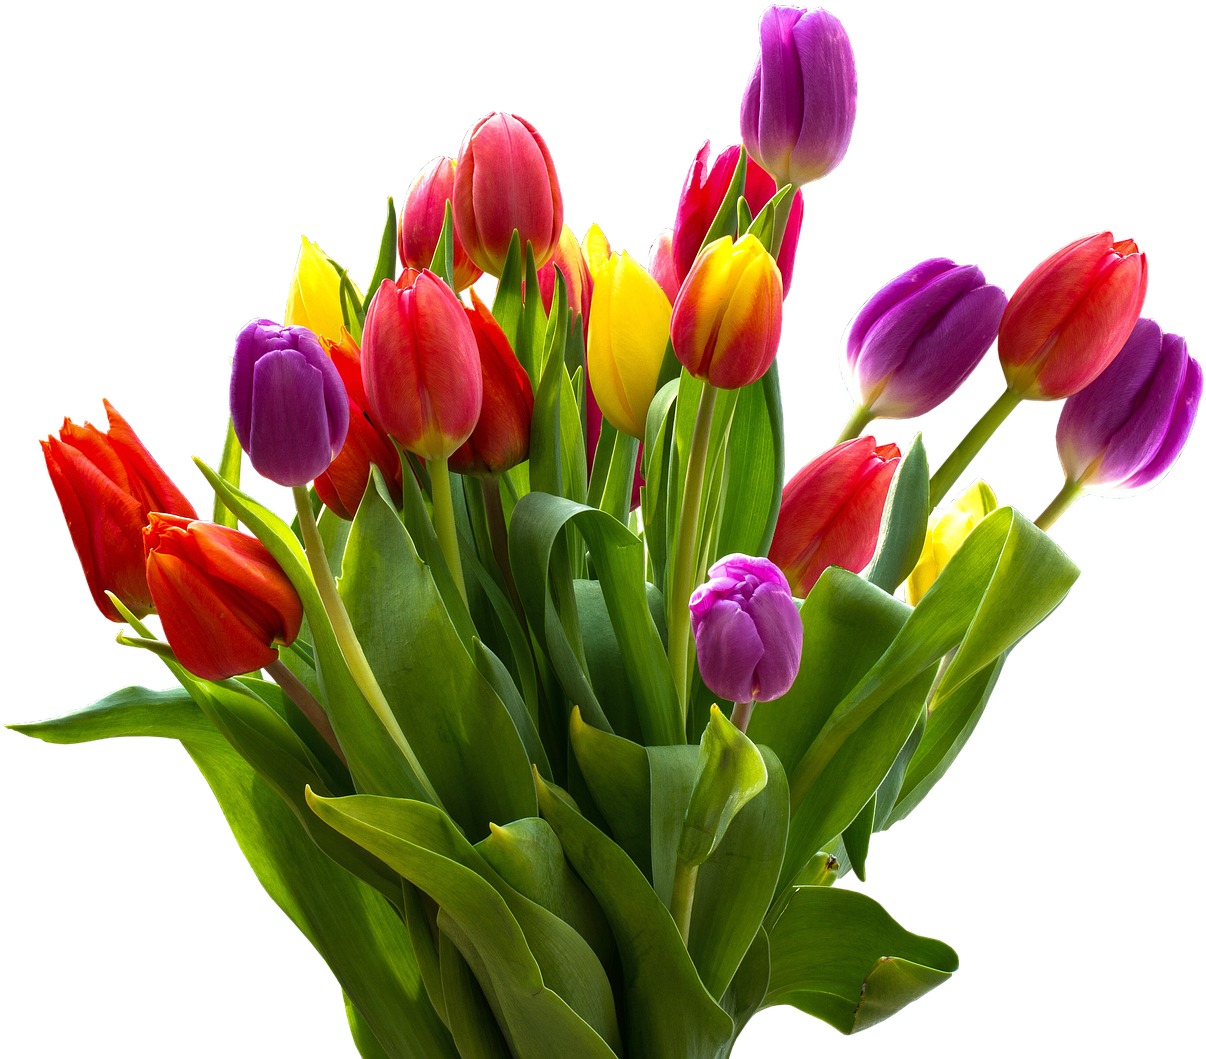 A Bouquet Of Colorful Tulips